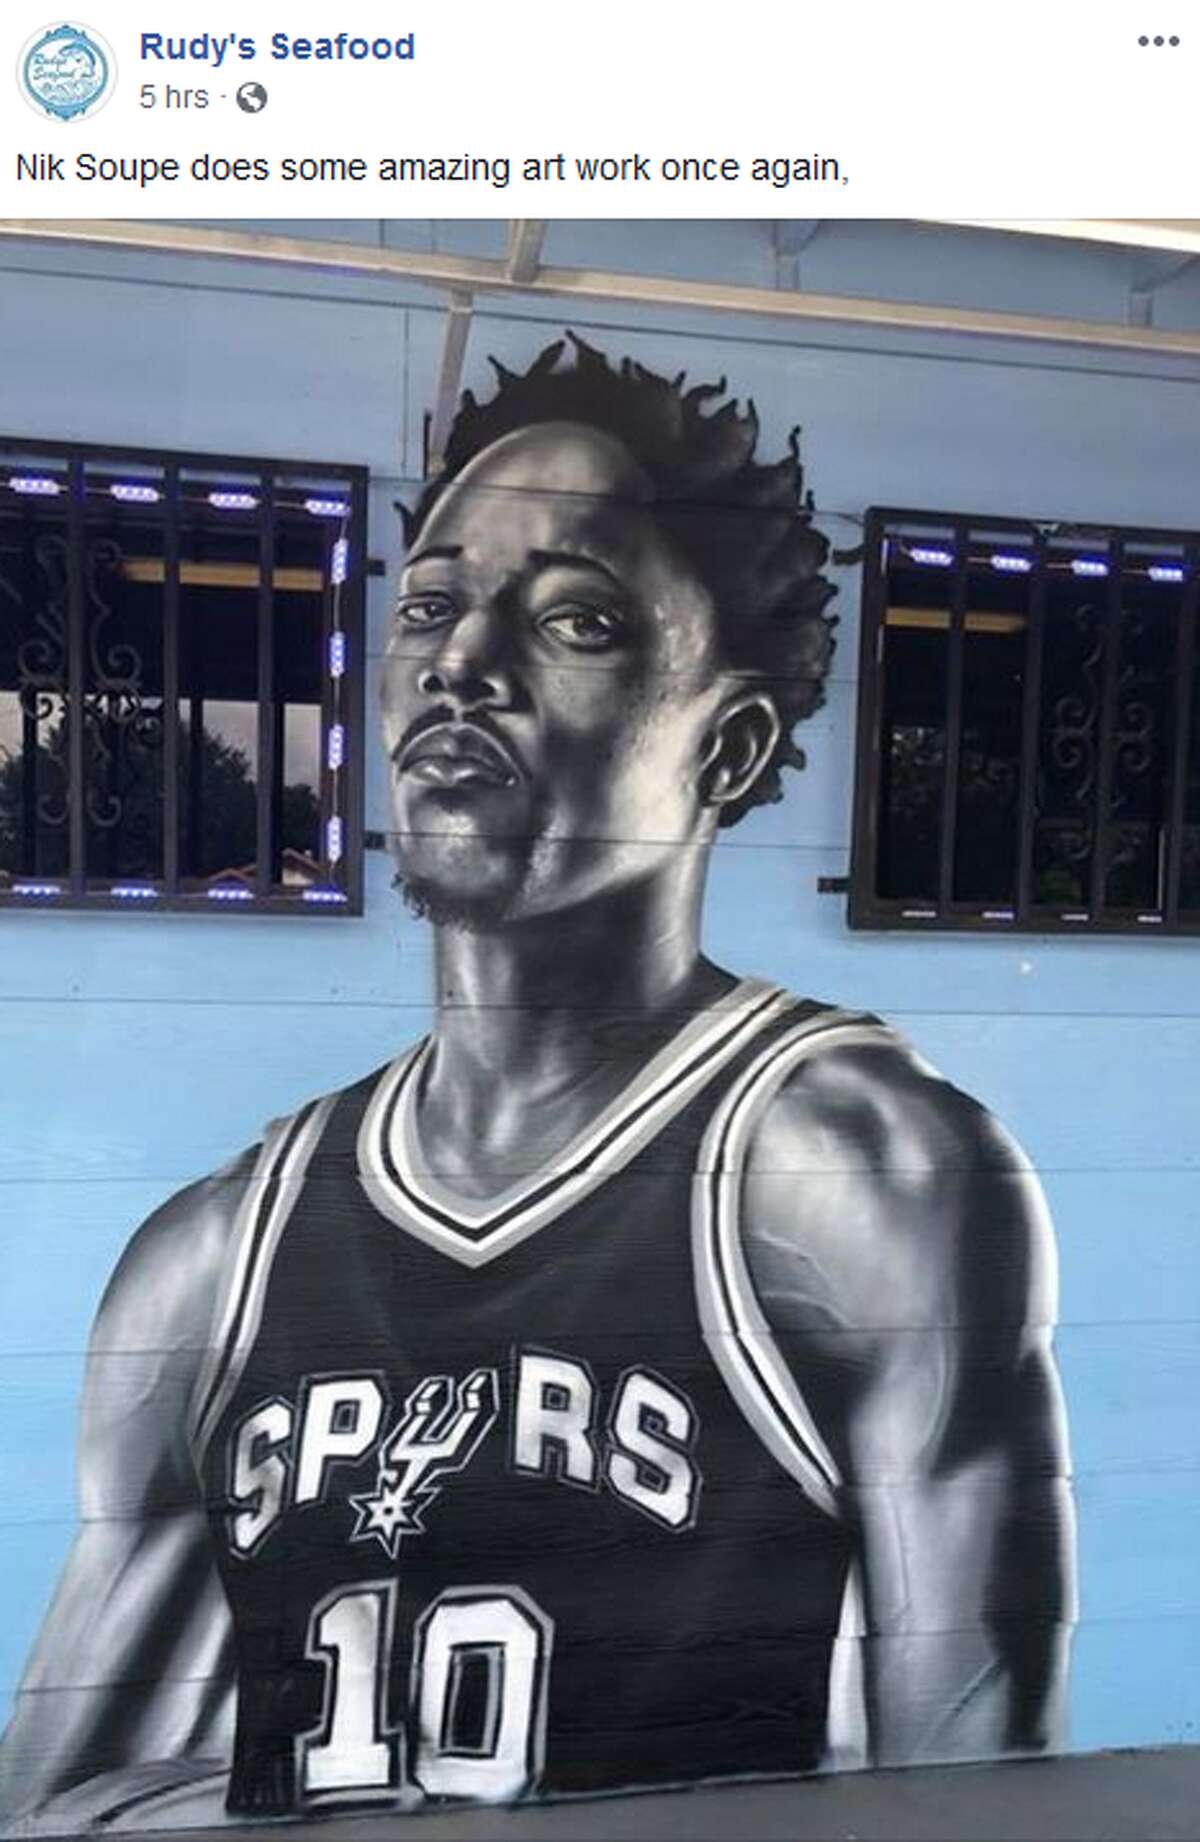 New Spurs DeMar DeRozan and team legend George Gervin were adding to the growing Silver & Black mural at Rudy's Seafood this week.